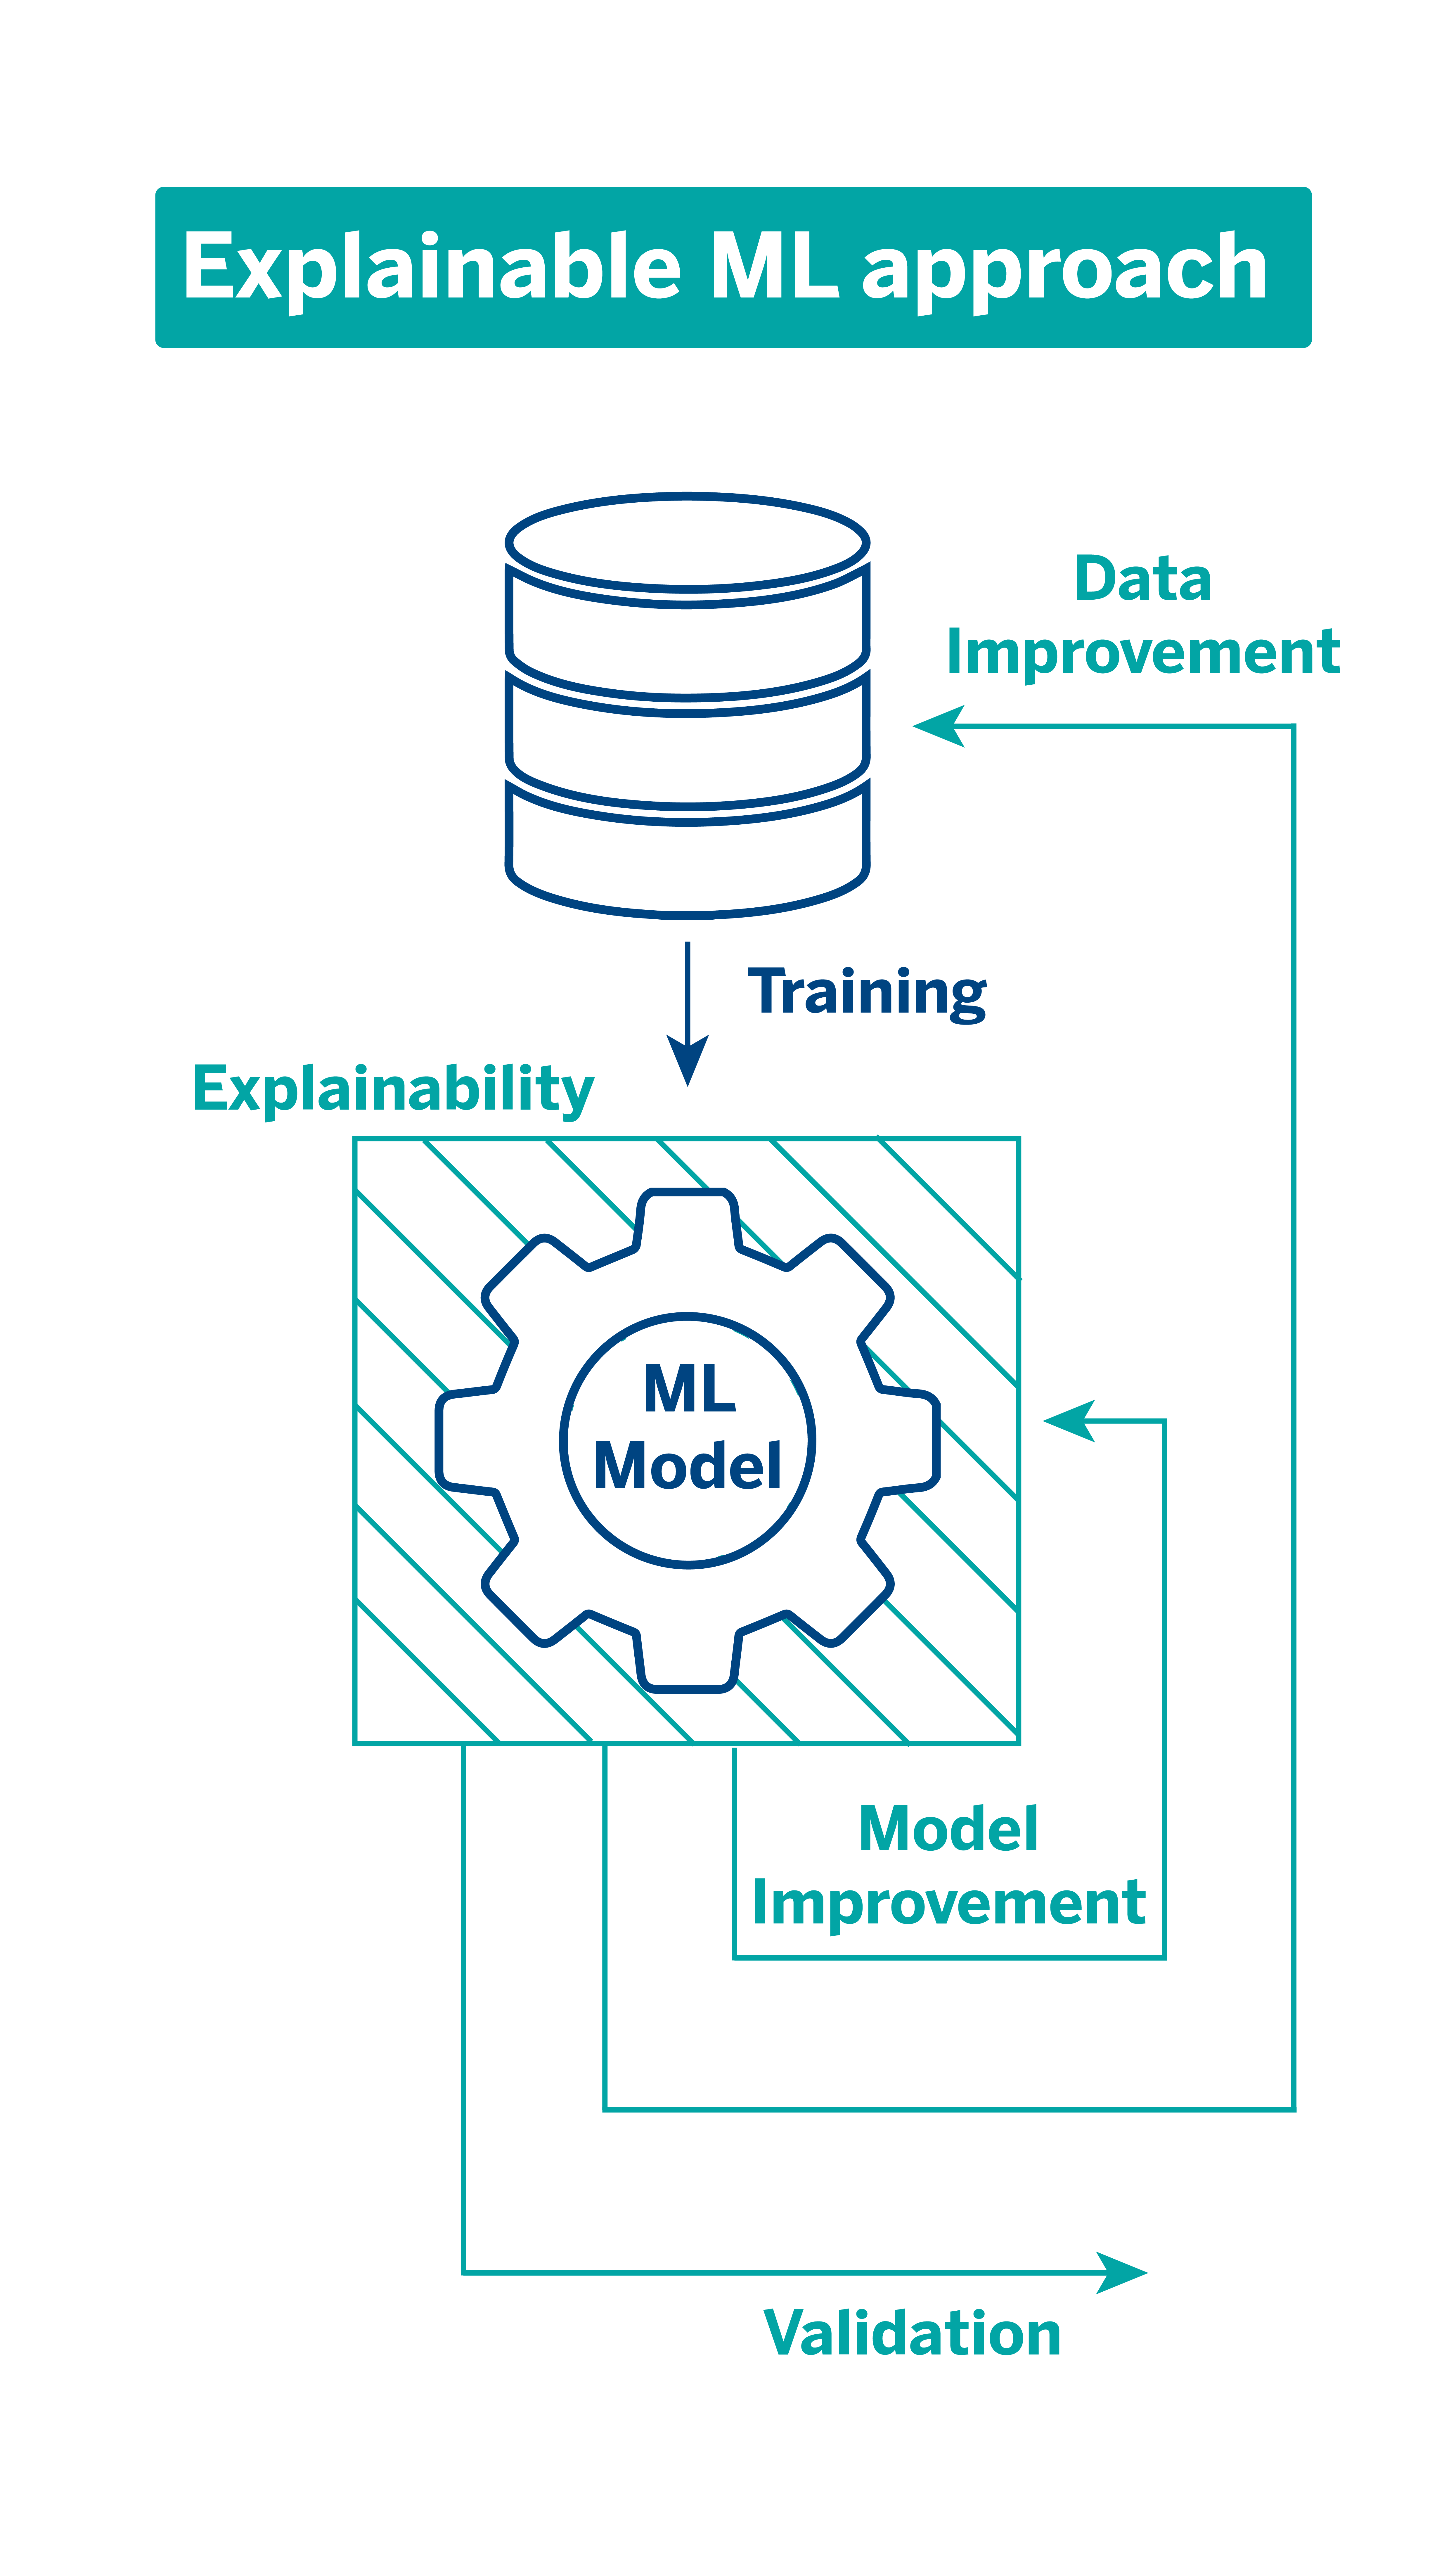 Model monitoring approach integrating an explainability module